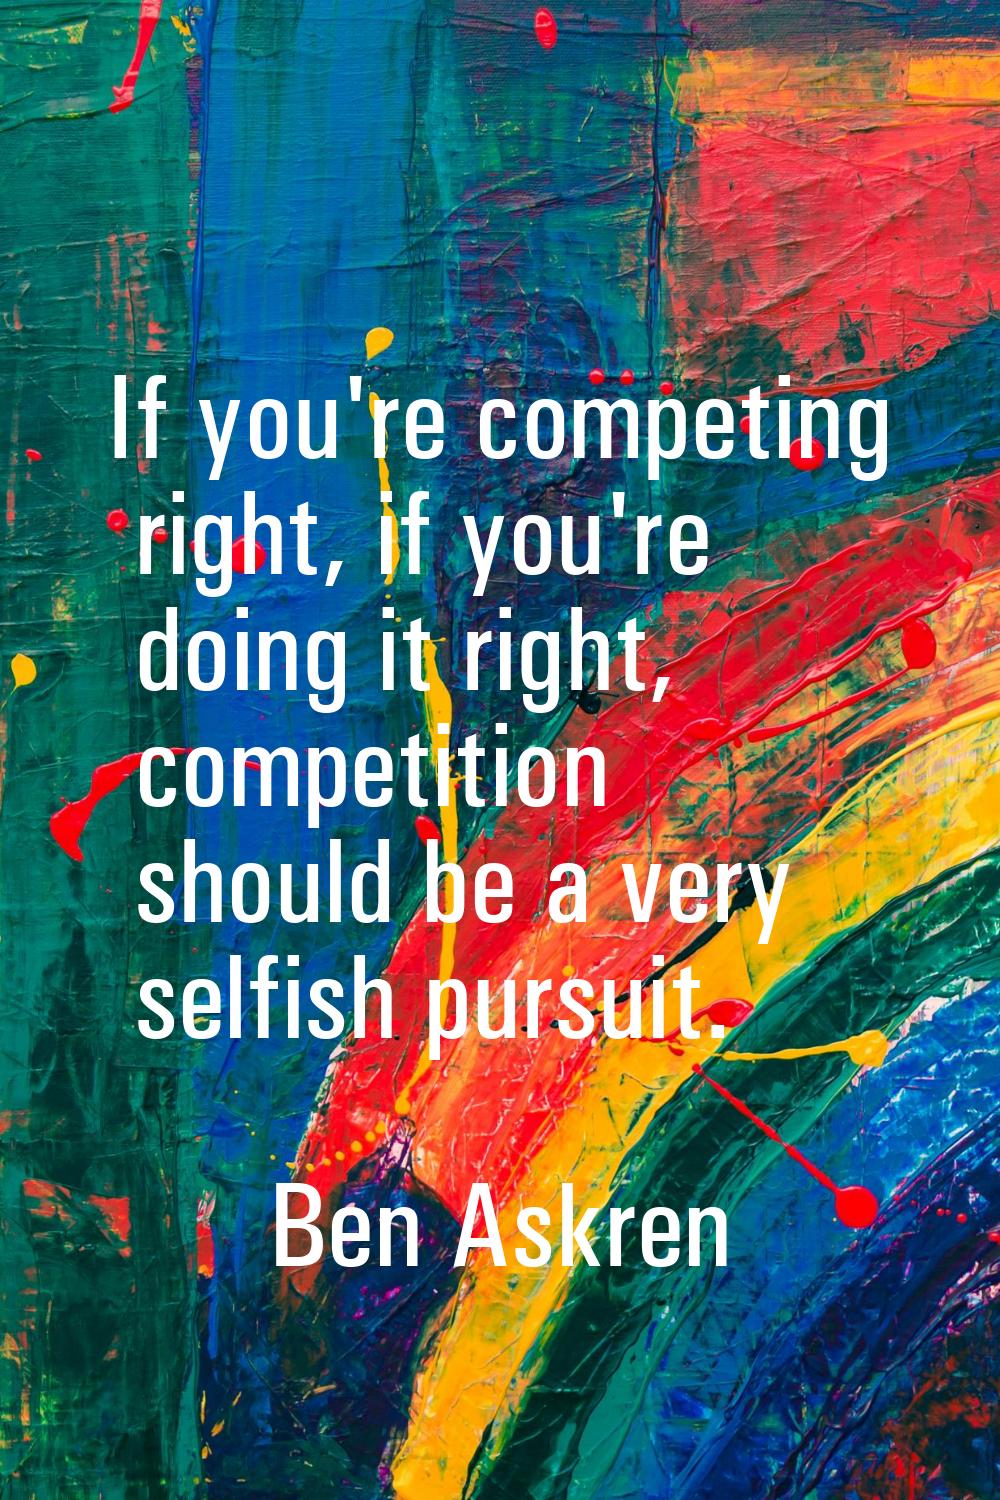 If you're competing right, if you're doing it right, competition should be a very selfish pursuit.